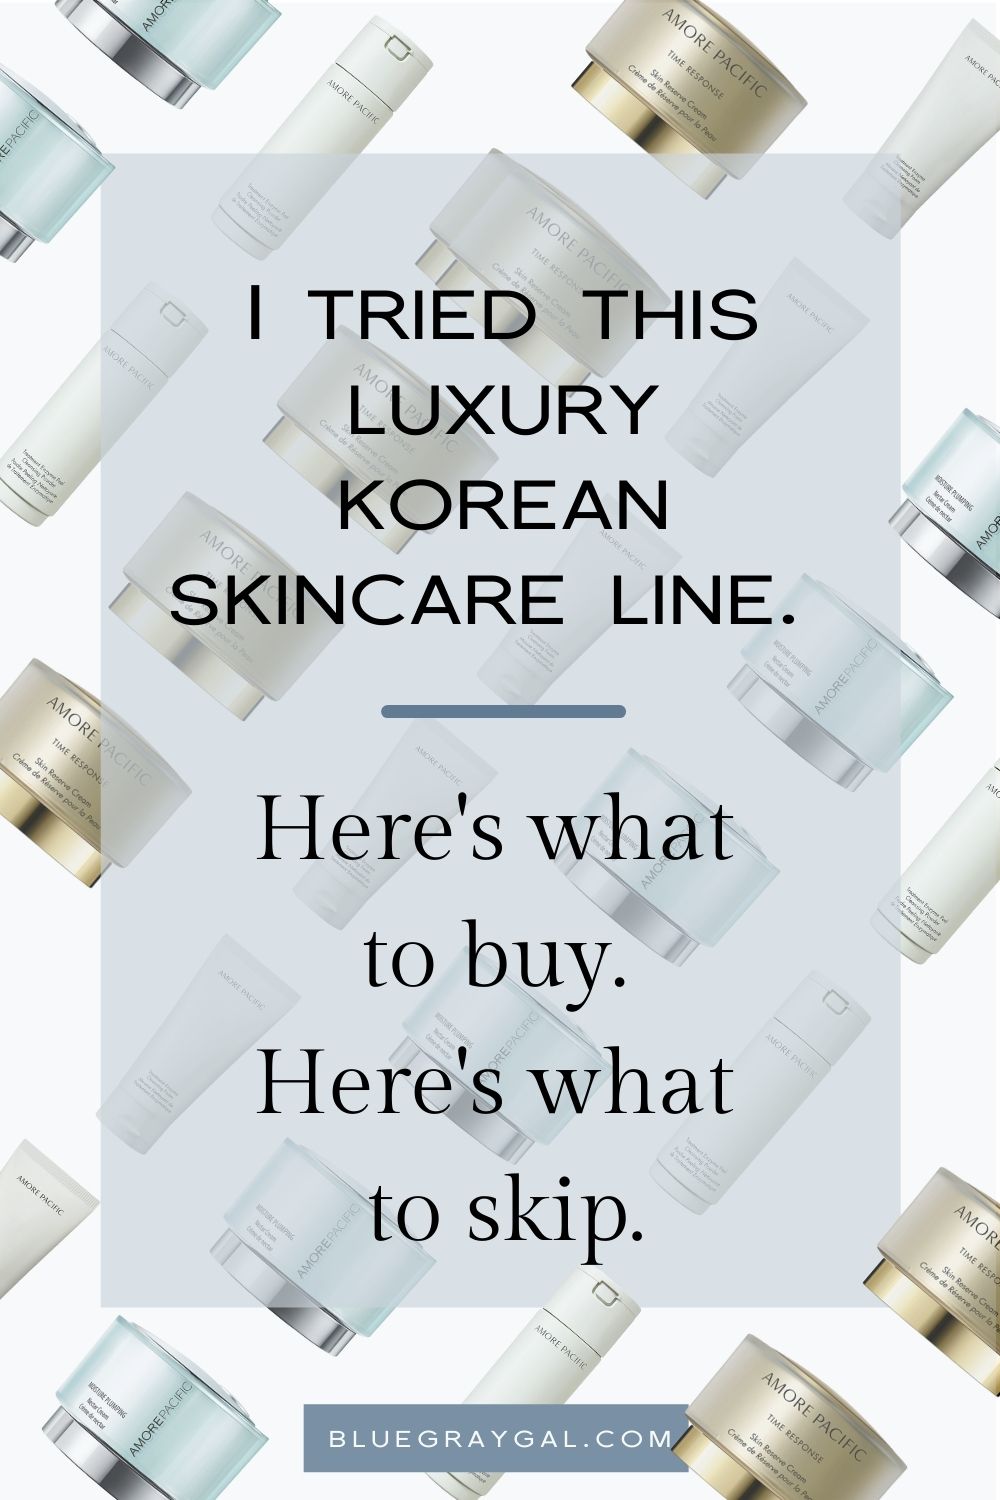 Deep dive amore pacific reviews of top Korean skincare products like the amore pacific enzyme powder, amore pacific moisture plumping nectar cream, amore pacific eye cream and more.